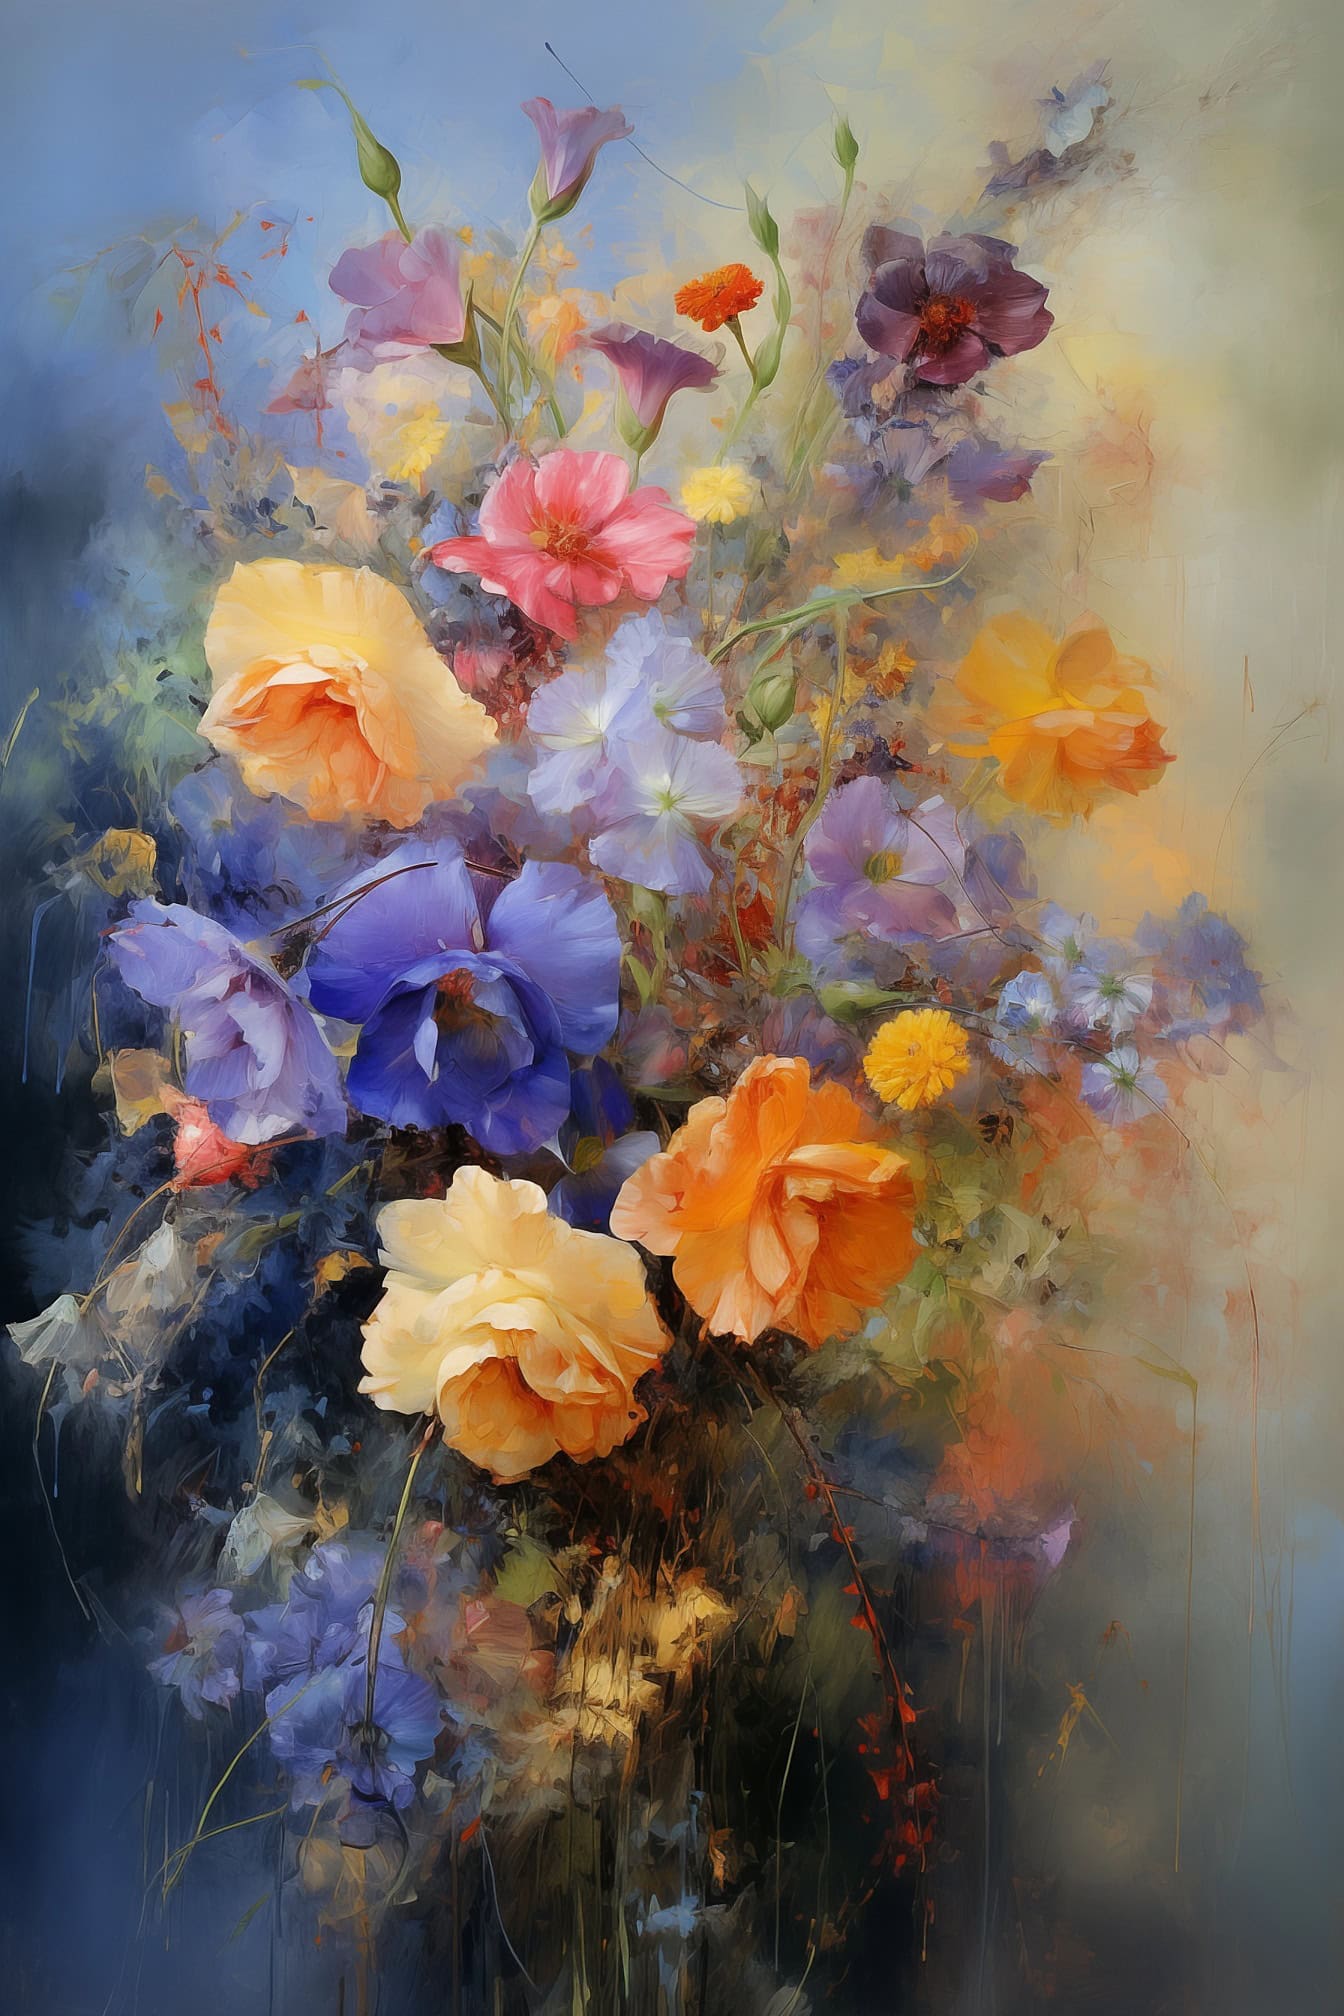 Creative still life oil painting of colorful wildflowers with dripping paint